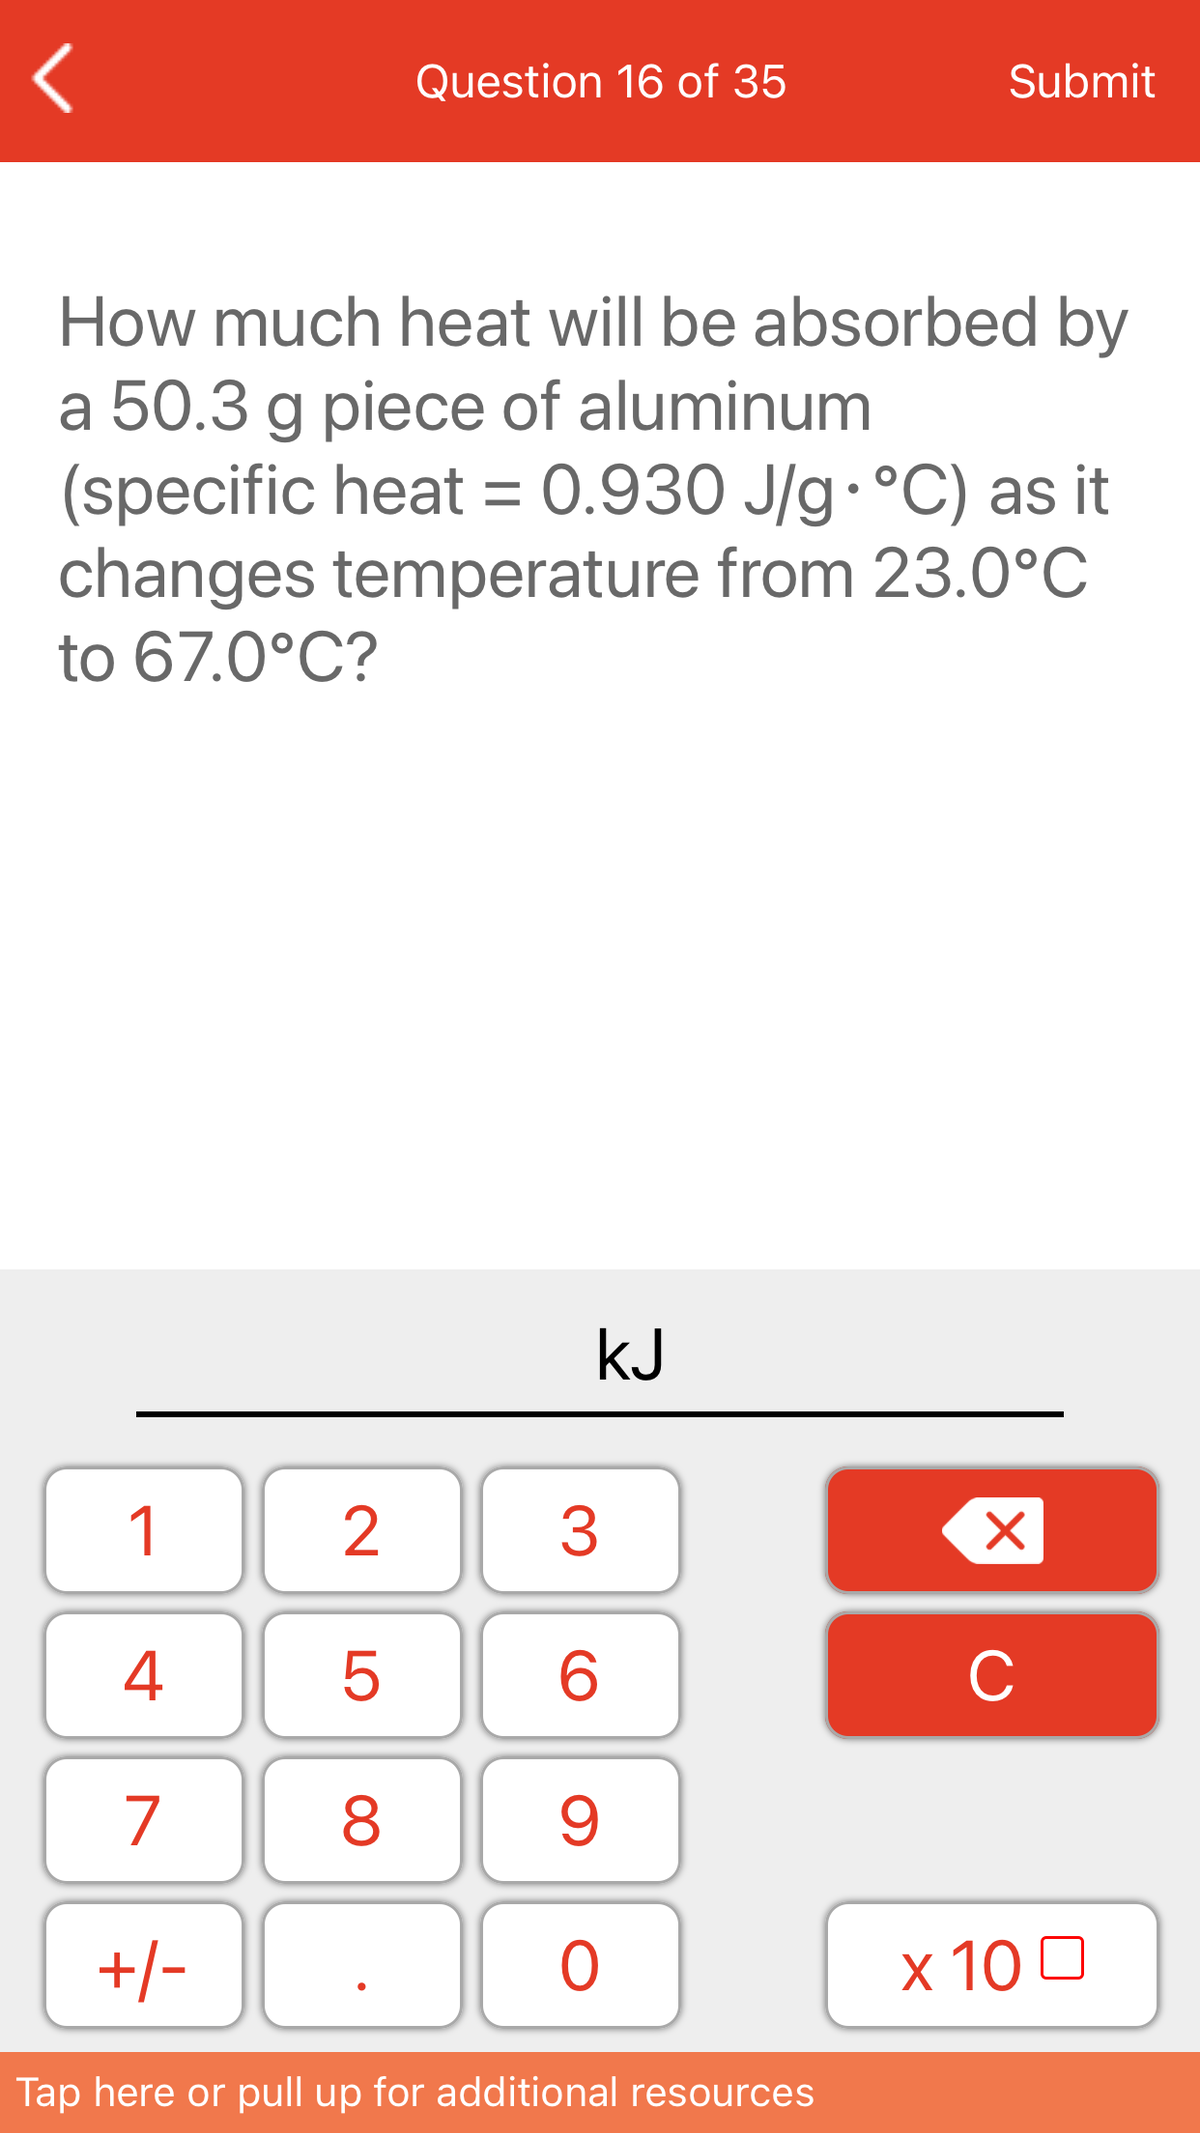 Question 16 of 35
Submit
How much heat will be absorbed by
a 50.3 g piece of aluminum
(specific heat = 0.930 J/g. °C) as it
changes temperature from 23.0°C
to 67.0°C?
kJ
1
3
4
C
7
+/-
x 10 0
Tap here or pull up for additional resources
LO
00
